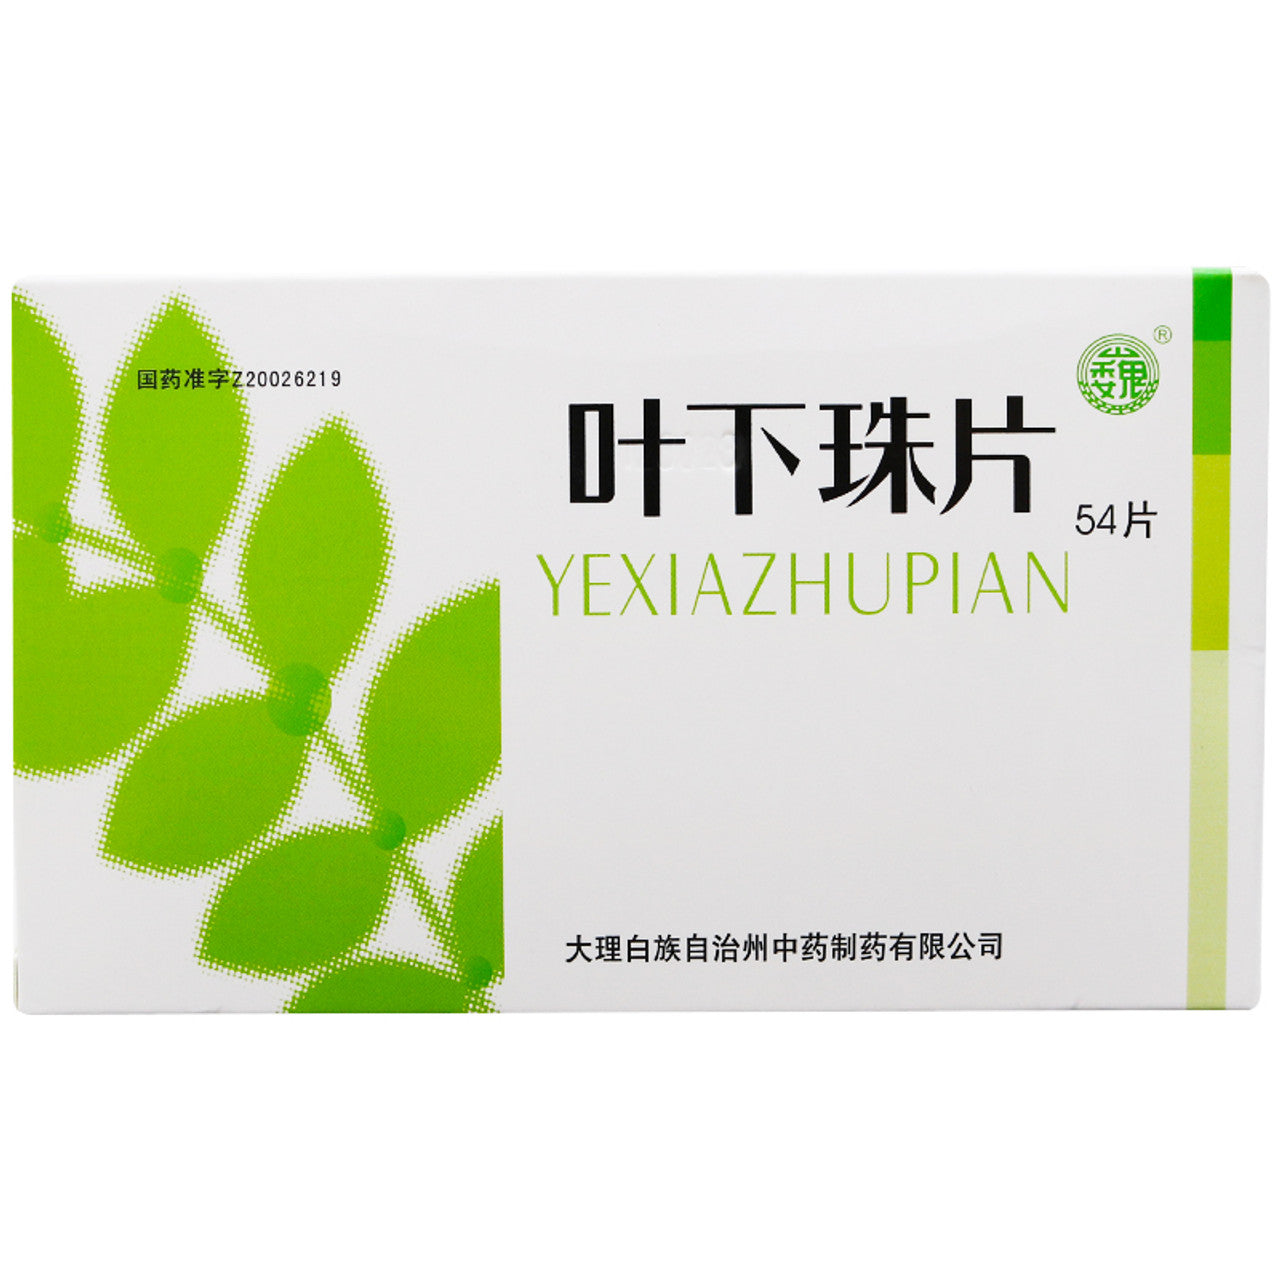 China herb. Brand Wei. Yexiazhu Pian or Ye Xia Zhu Pian or Yexiazhu Tablets for  hypochondriac pain, abdominal distension, anorexia, nausea, loose stools, jaundice, acute and chronic hepatitis B caused by liver and gallbladder damp-heat.